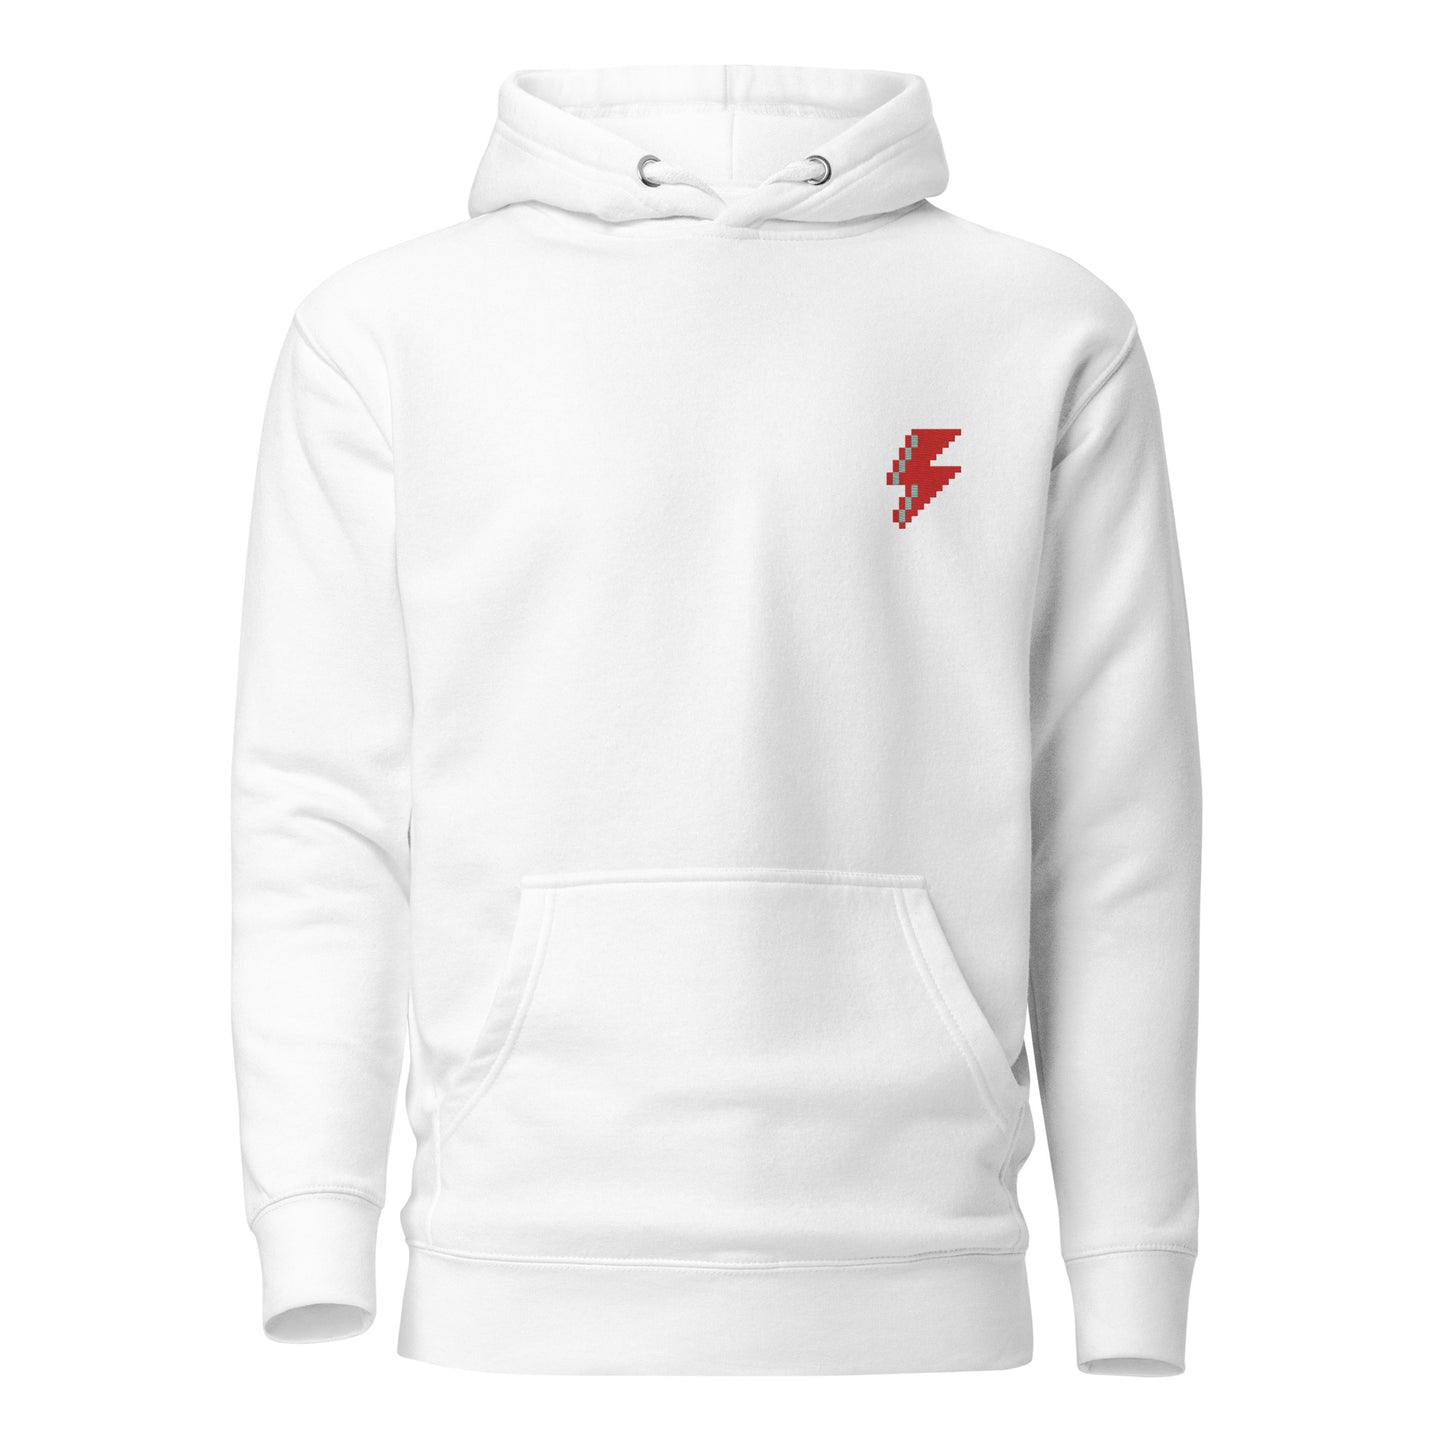 SVOLTA Pixel Bolt Embroidered Unisex Hoodie in White, XS-XL - Adult